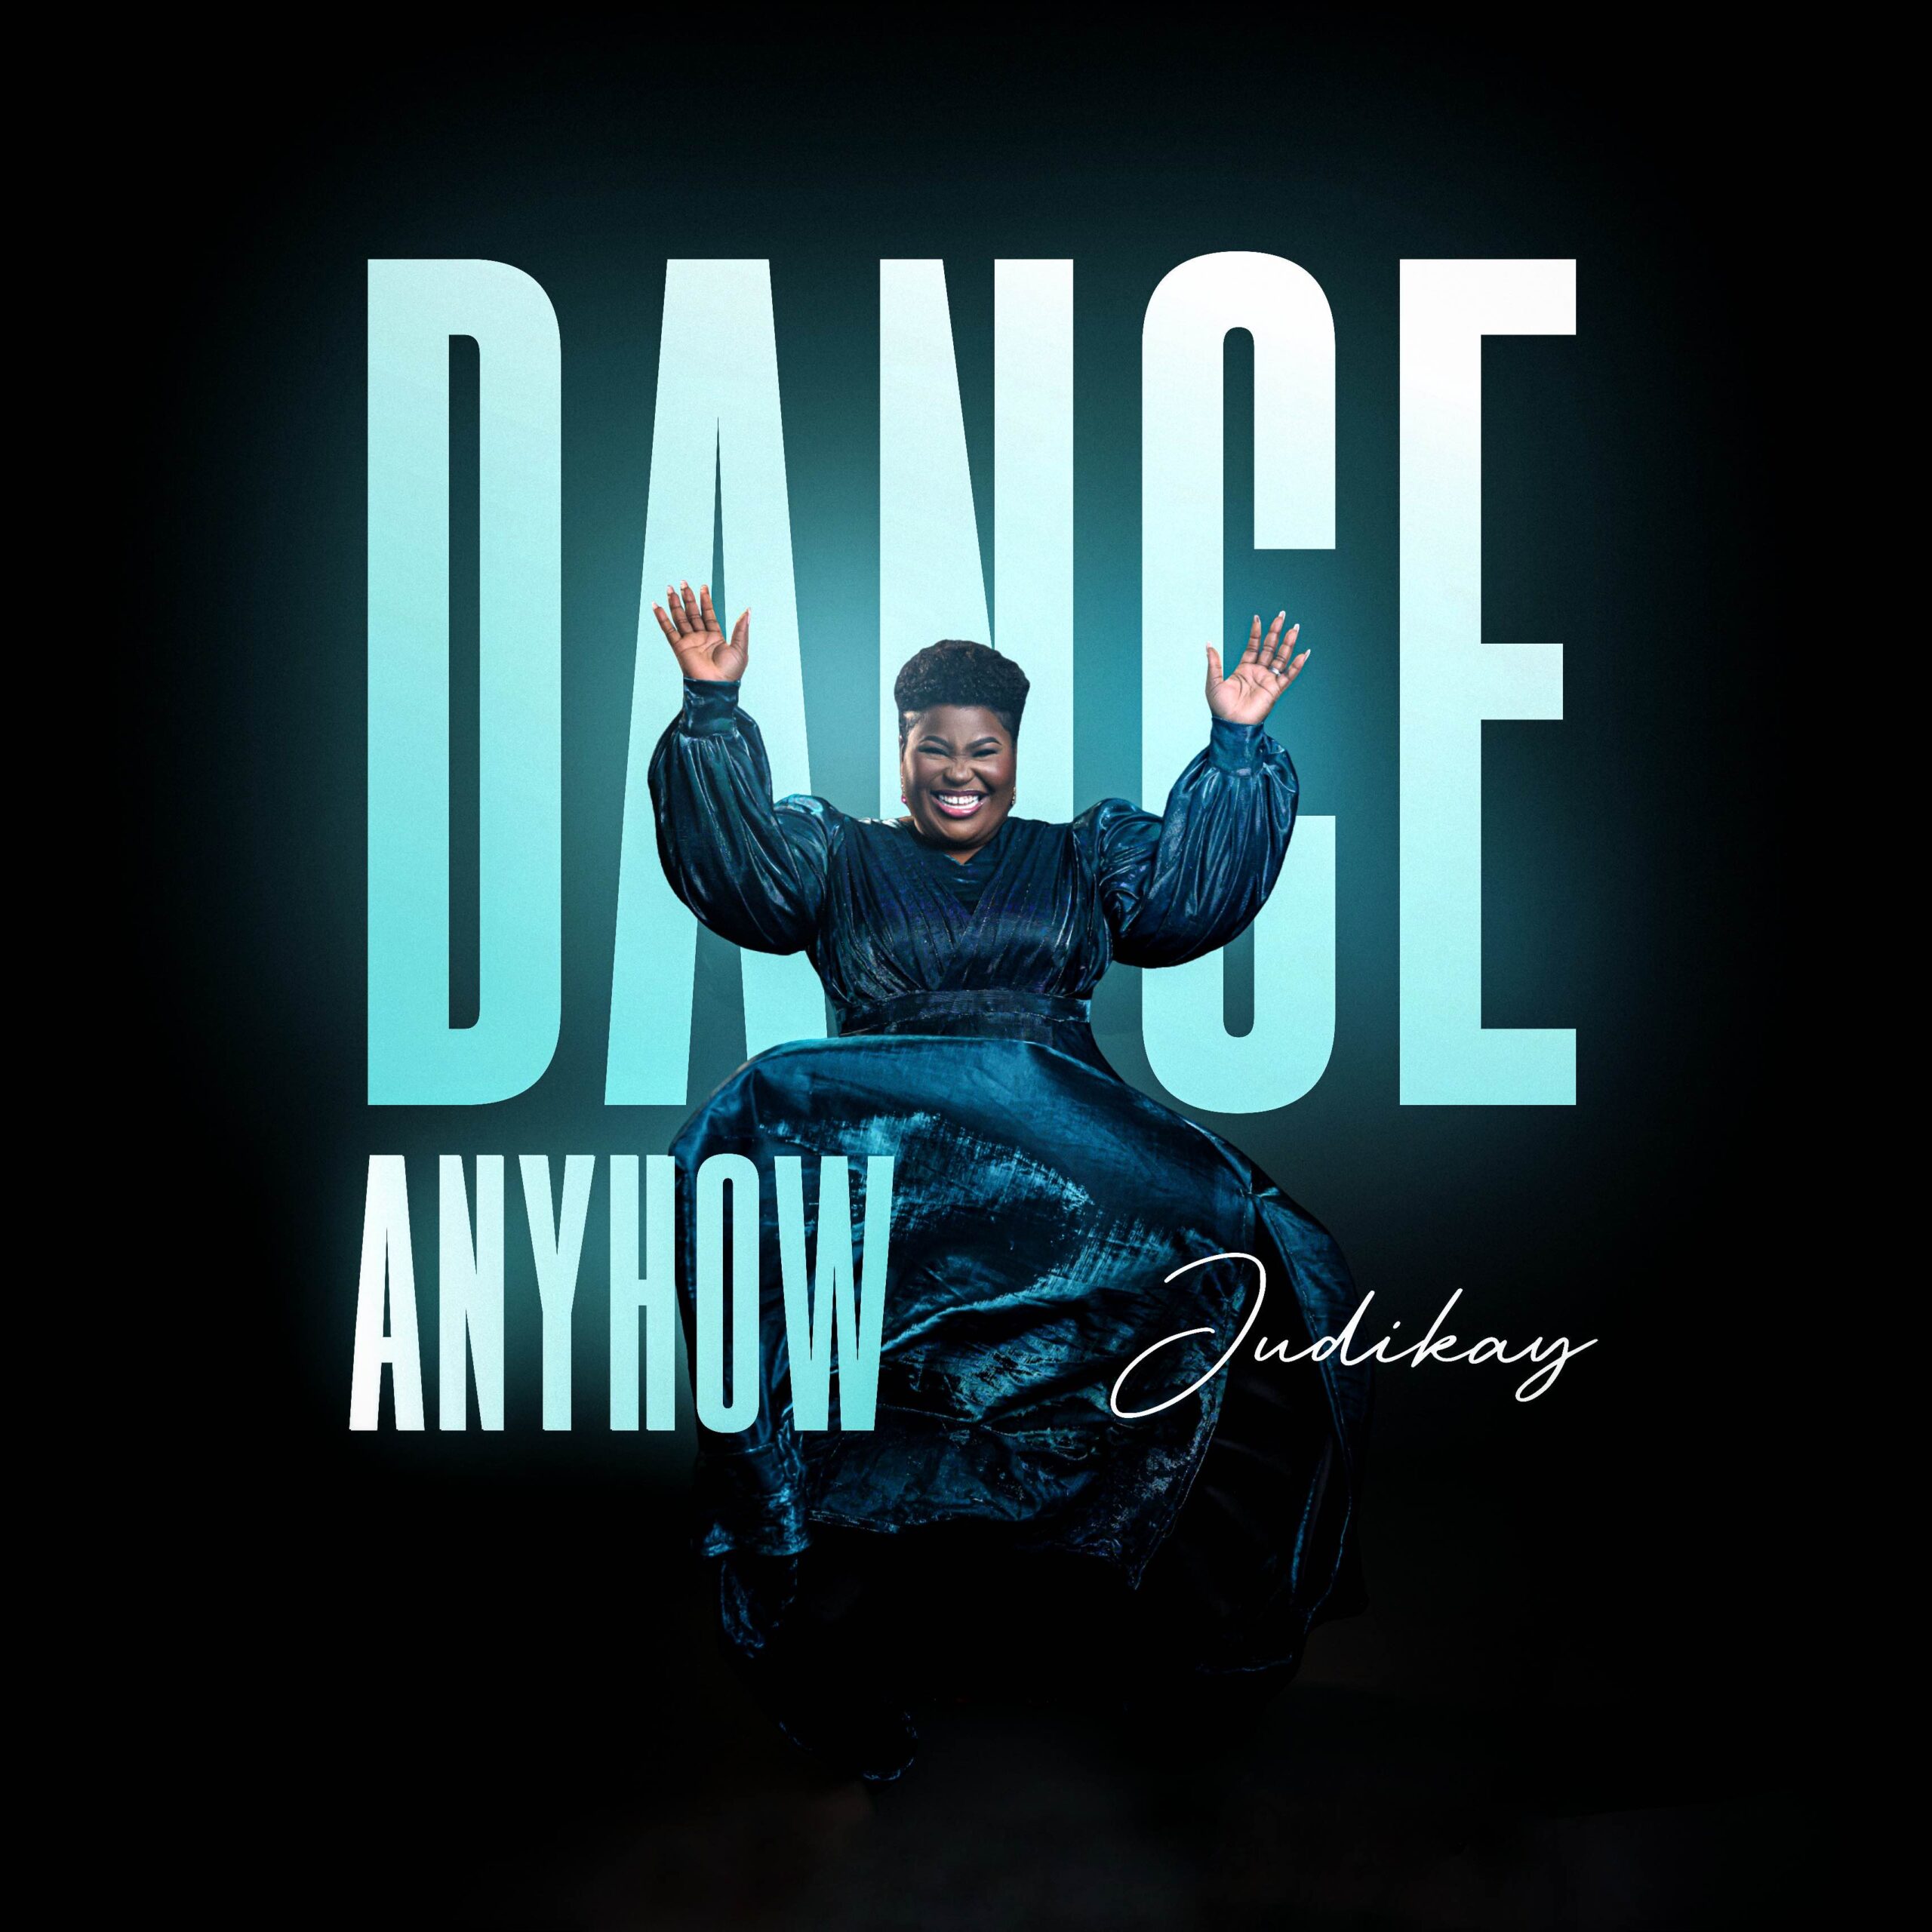 Judikay – Dance Anyhow’ (official Video)